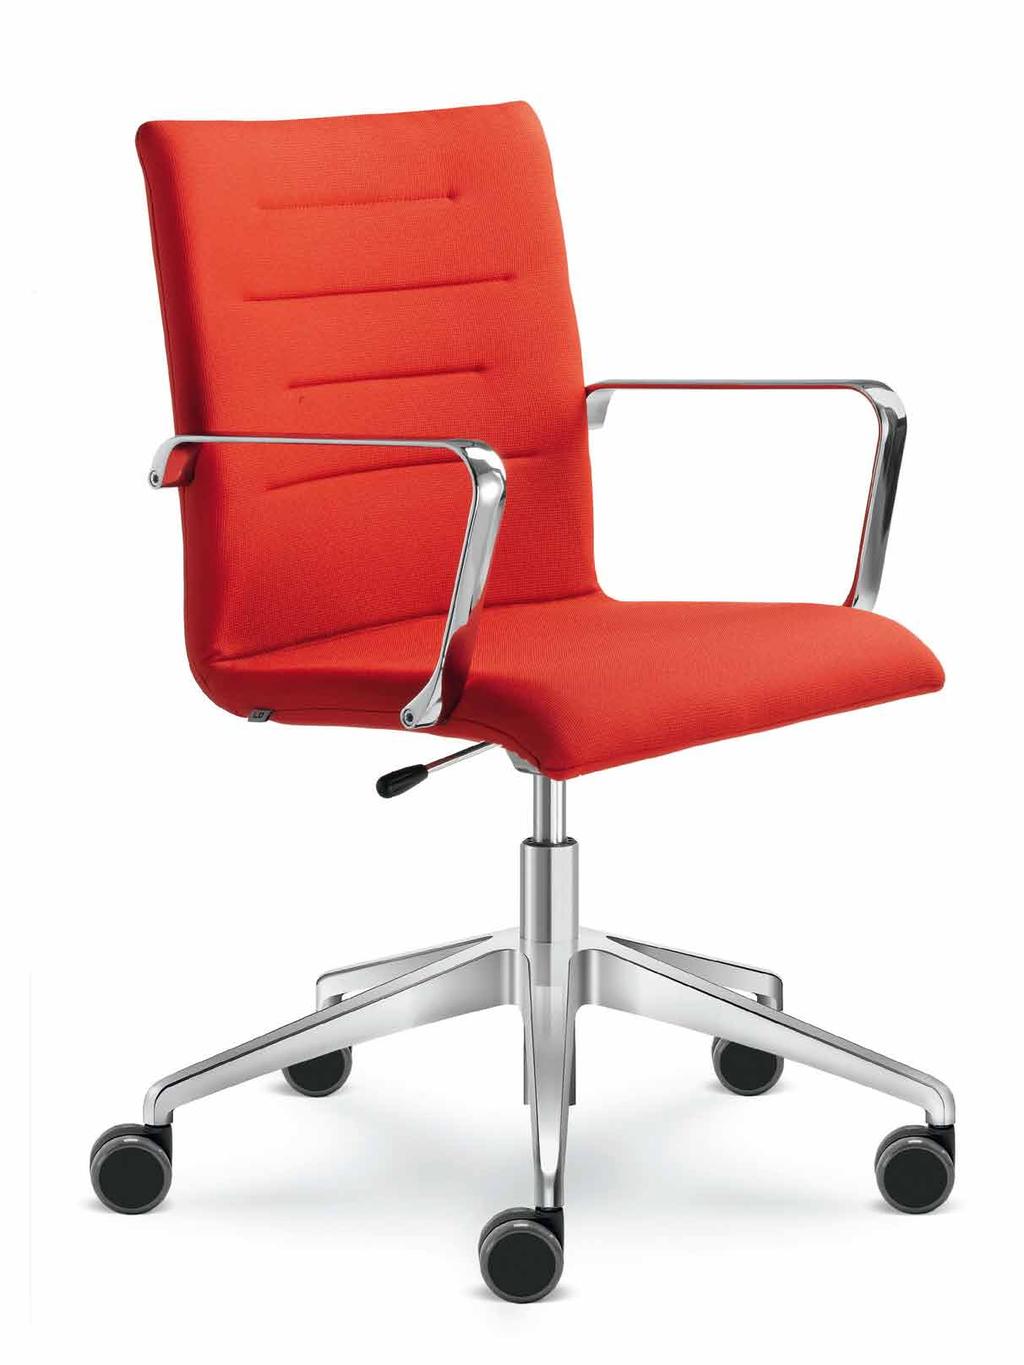 The Oslo range also brings two swivel chairs. Oslo is an elegant conference chair with a polished-aluminium four-star base with glides.